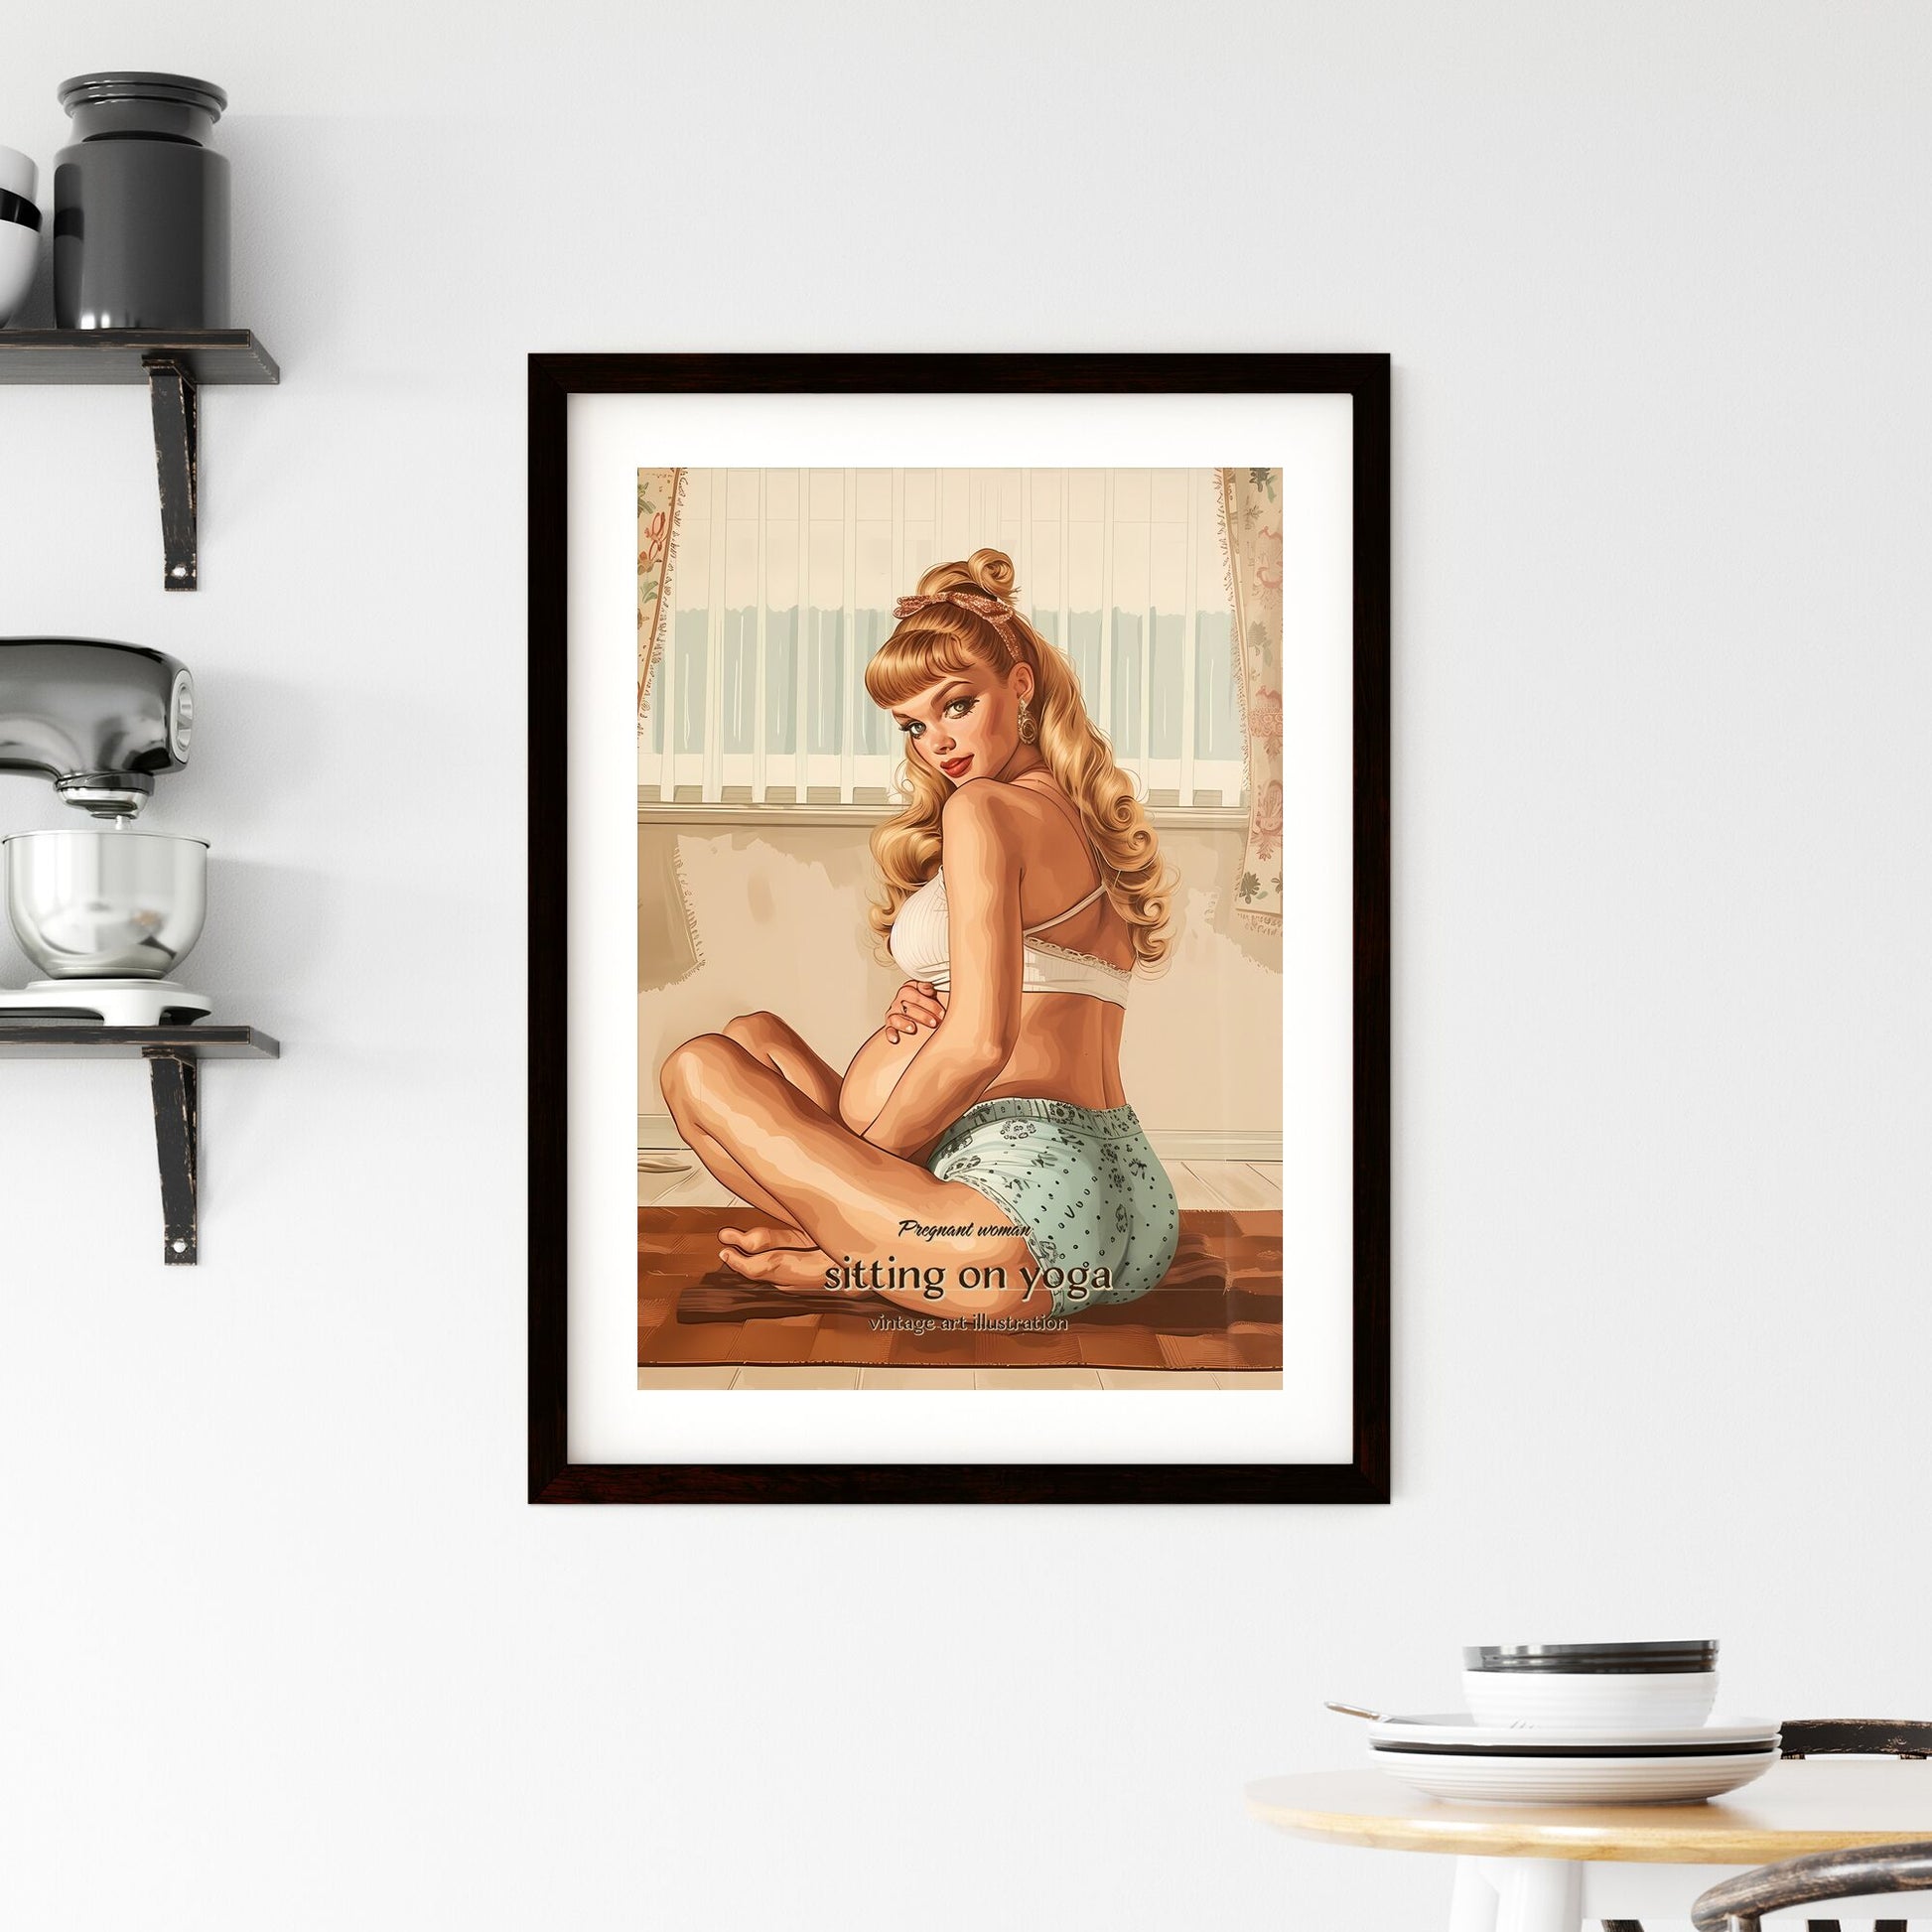 Pregnant woman, sitting on yoga, vintage art illustration, A Poster of a woman sitting on a rug Default Title